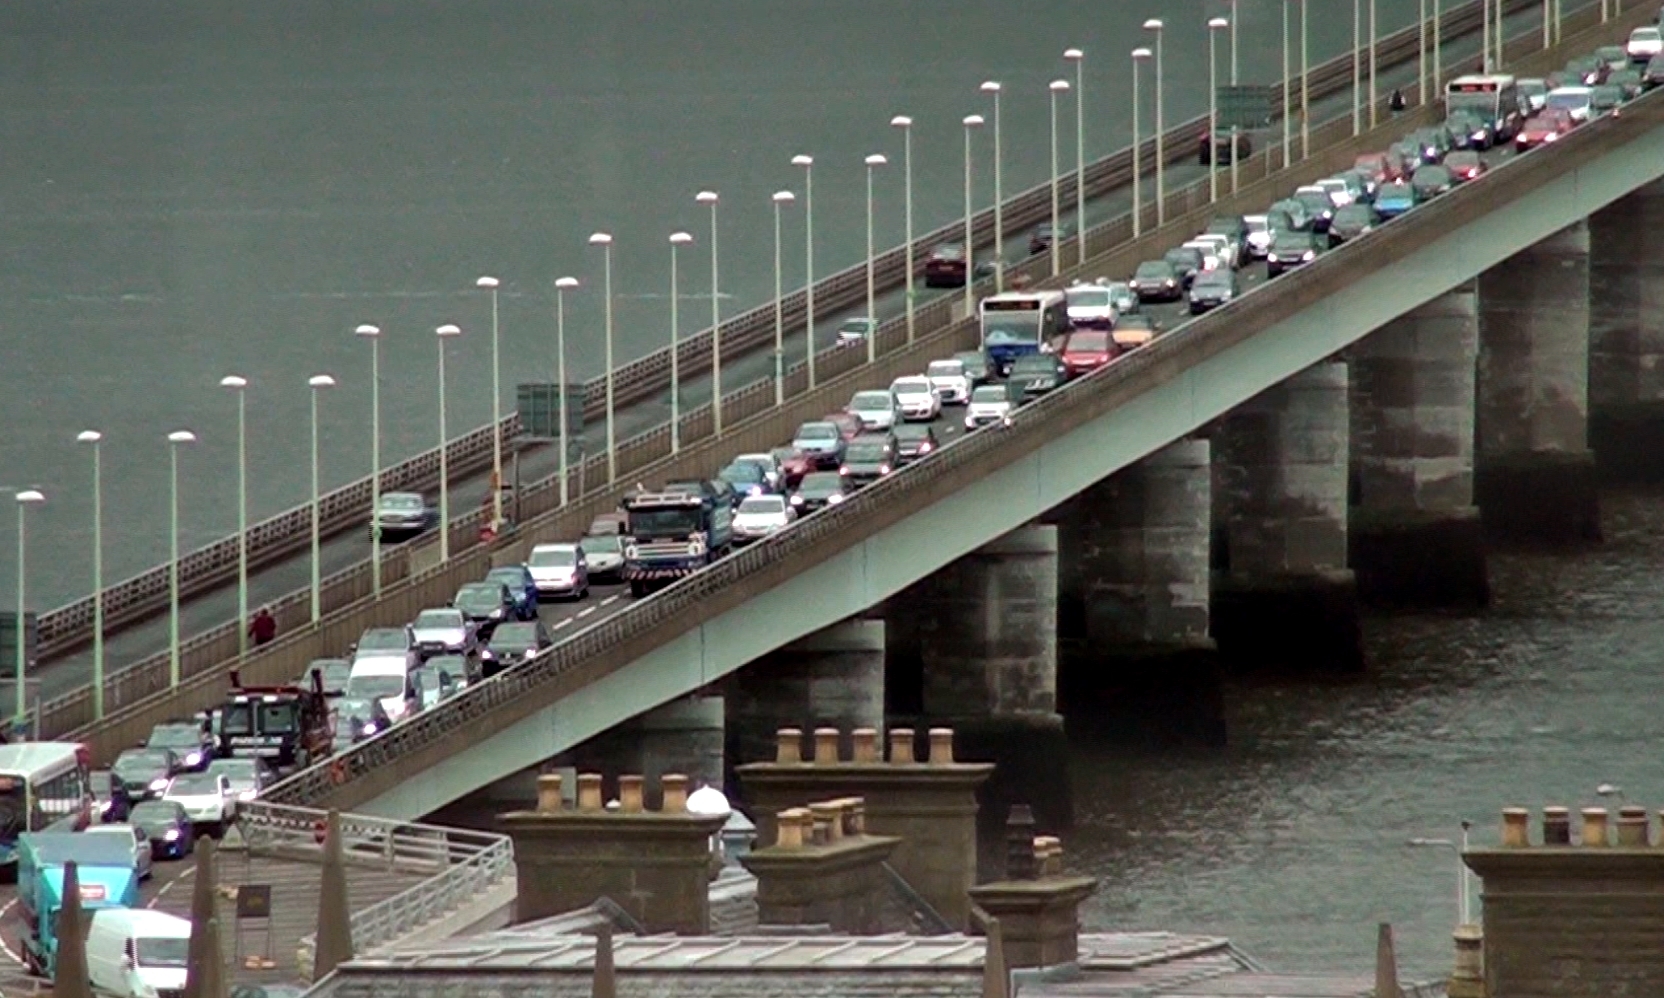 Reports suggest a car has become lodged under a crash barrier at the Fife side of the bridge.